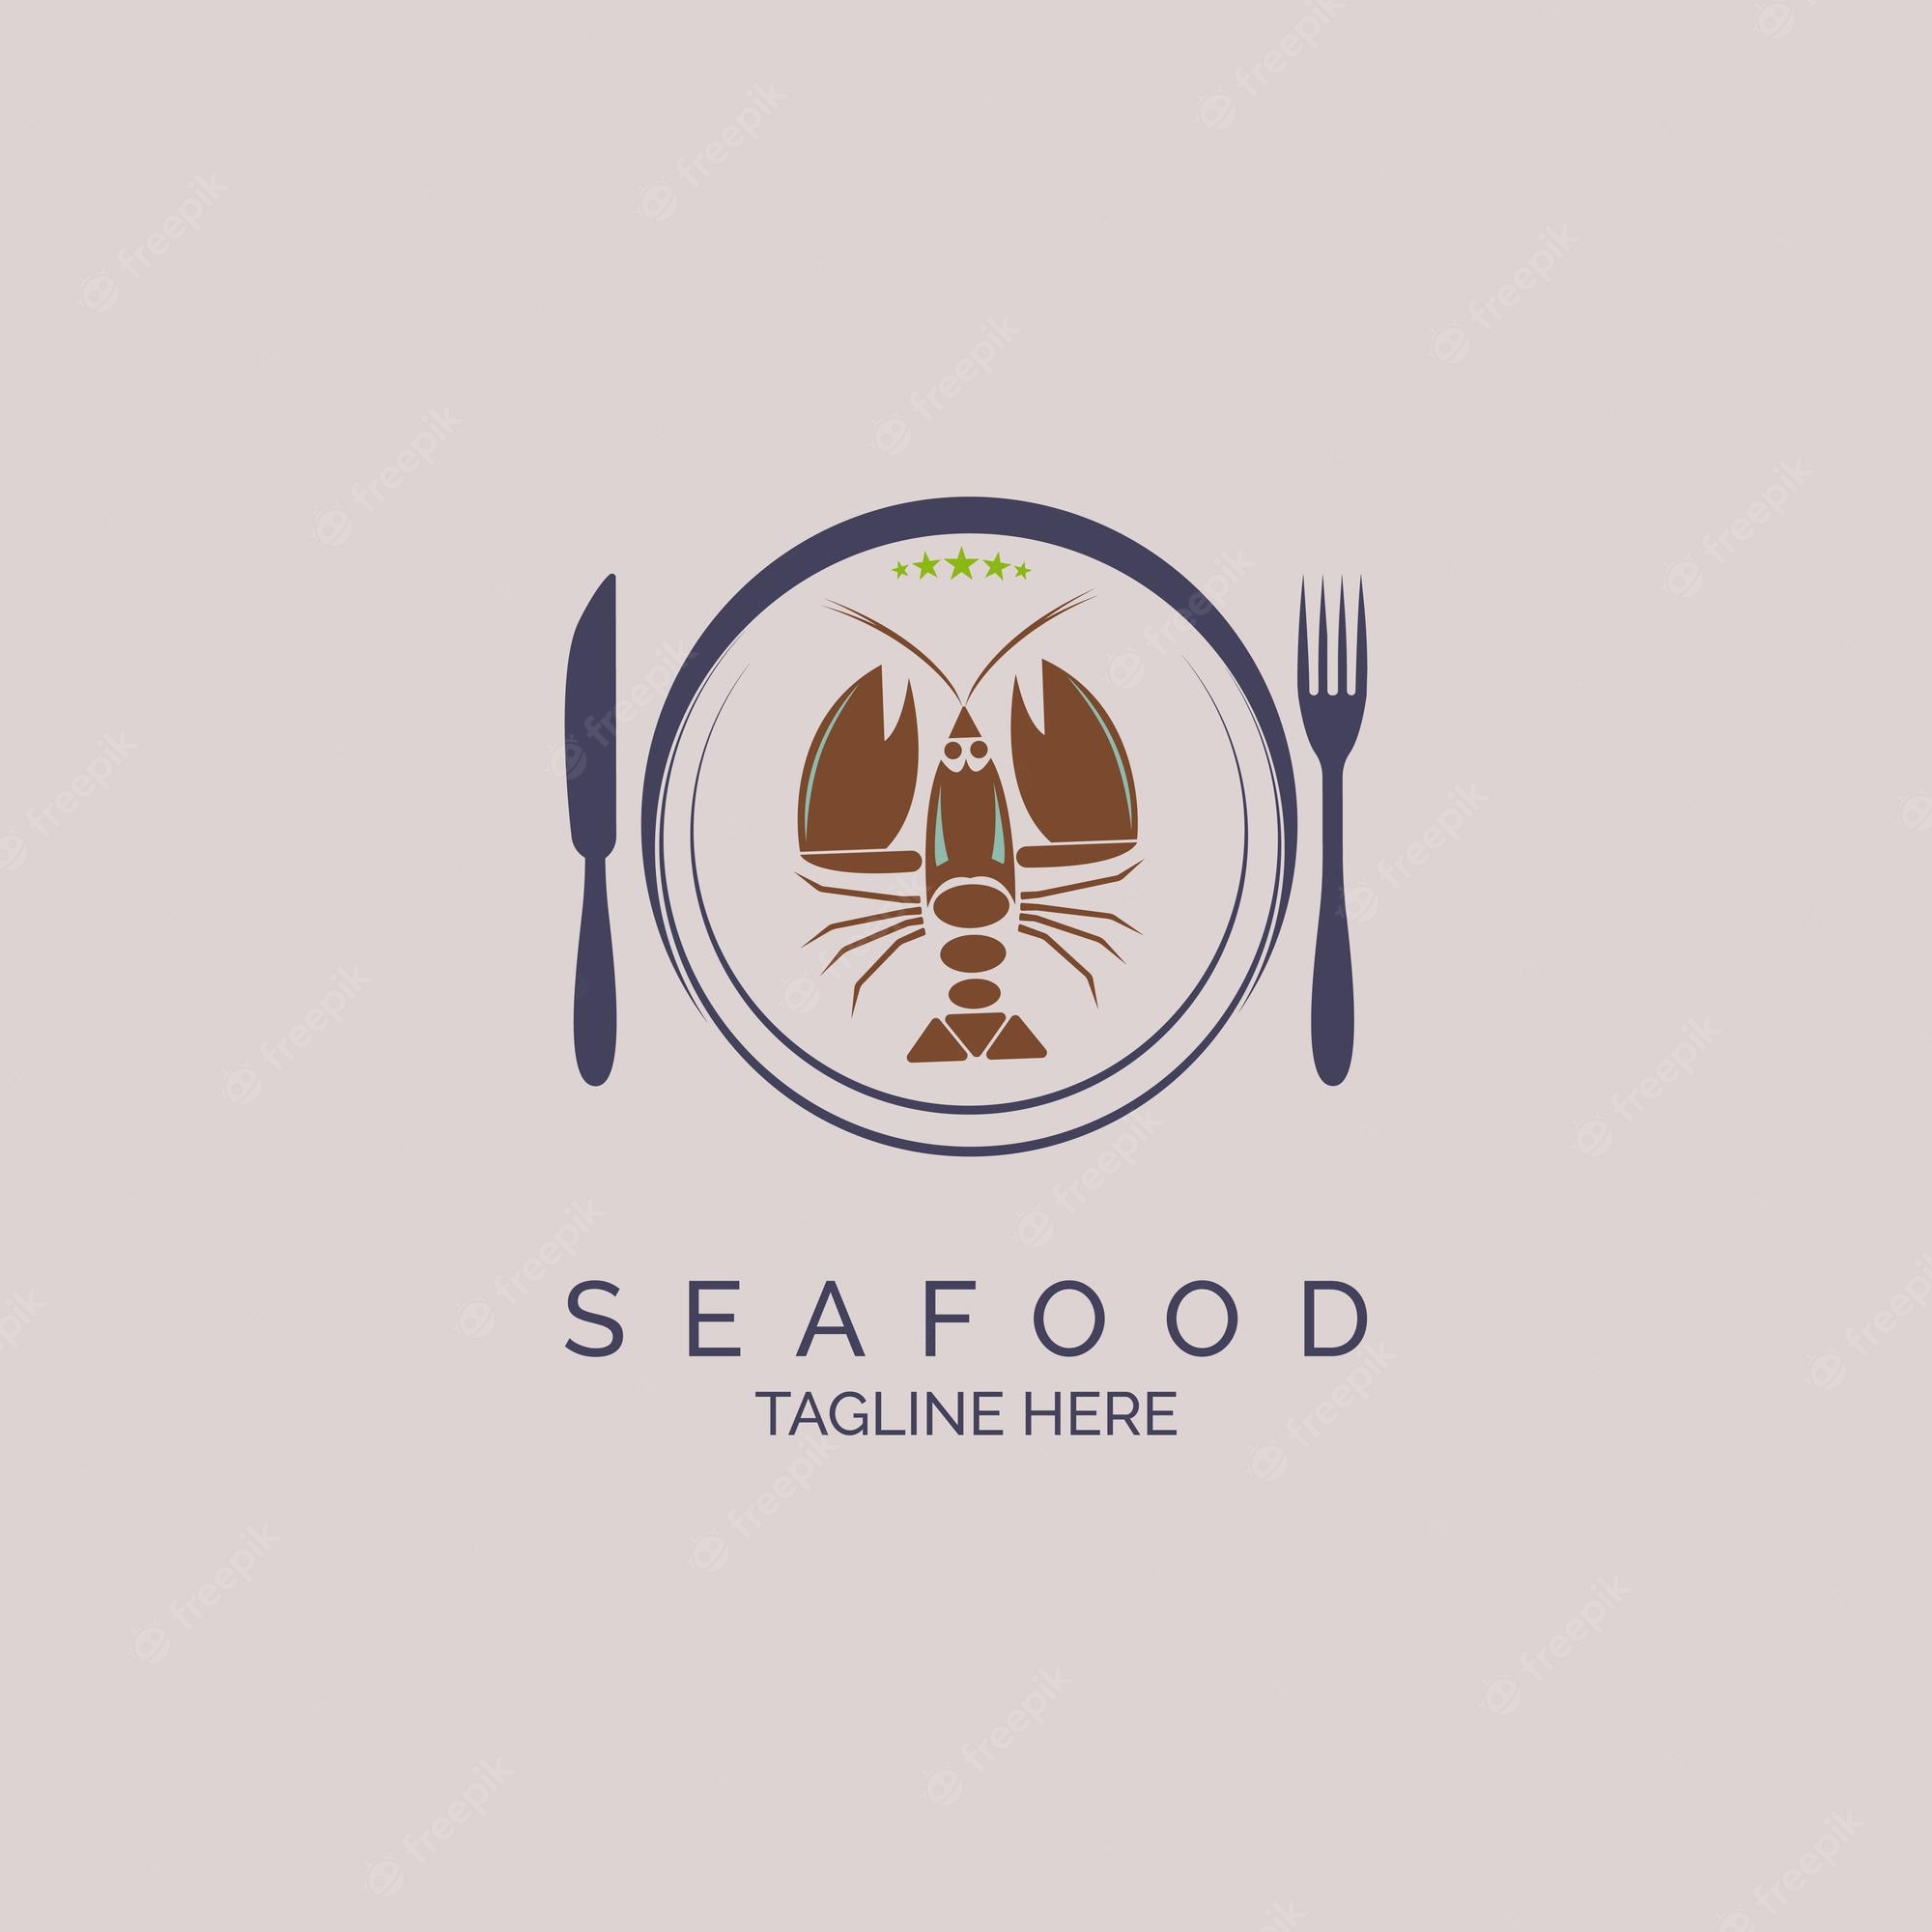 Premium Vector. Lobster seafood restaurant logo design for brand or company and other